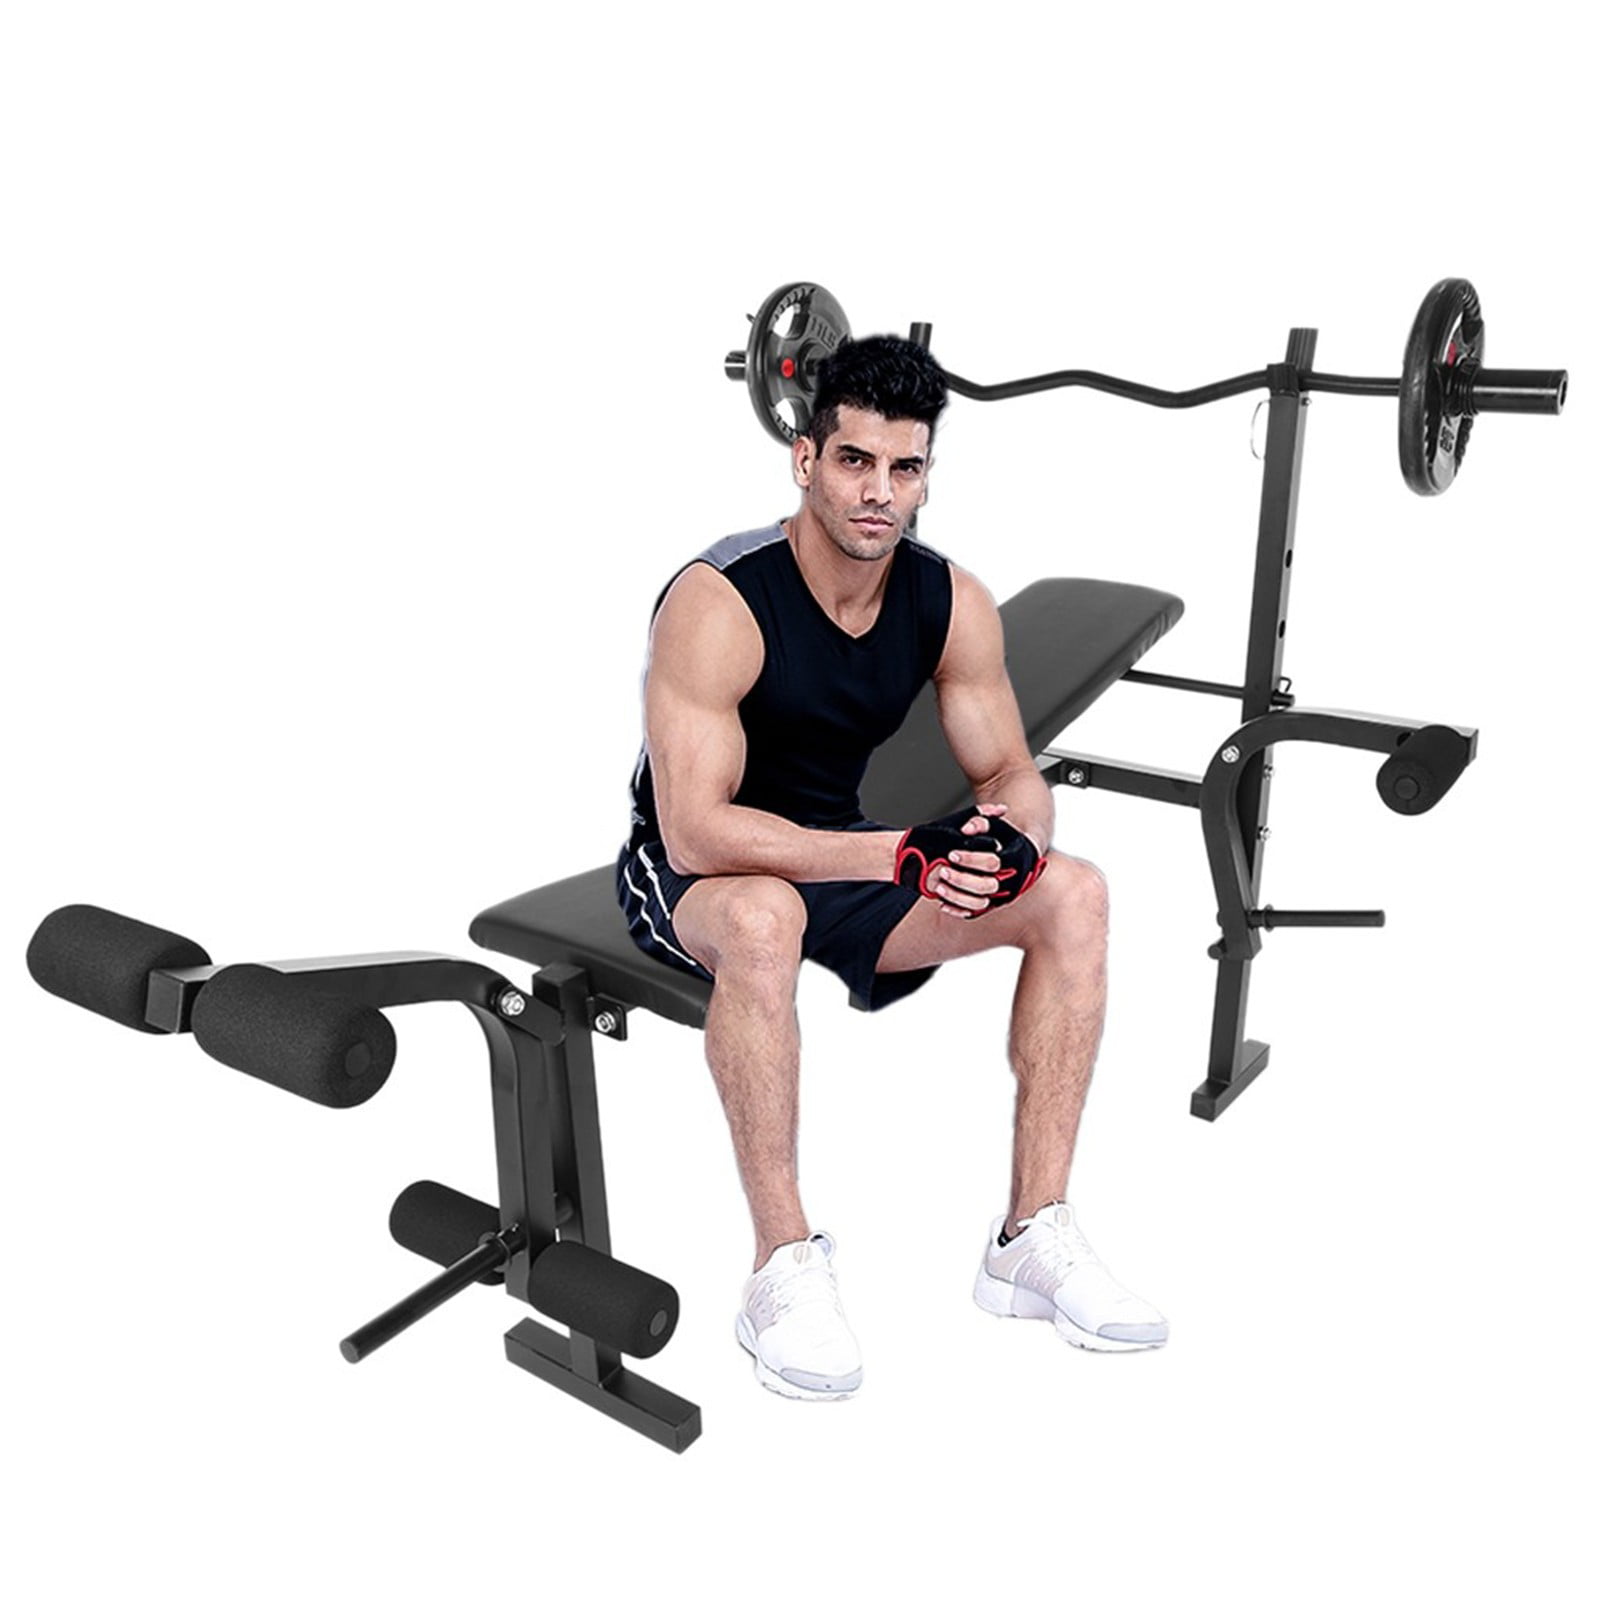 Details about   Weight Bench Barbell Lifting Press Gym Equipment Exercise Adjustable Incline 